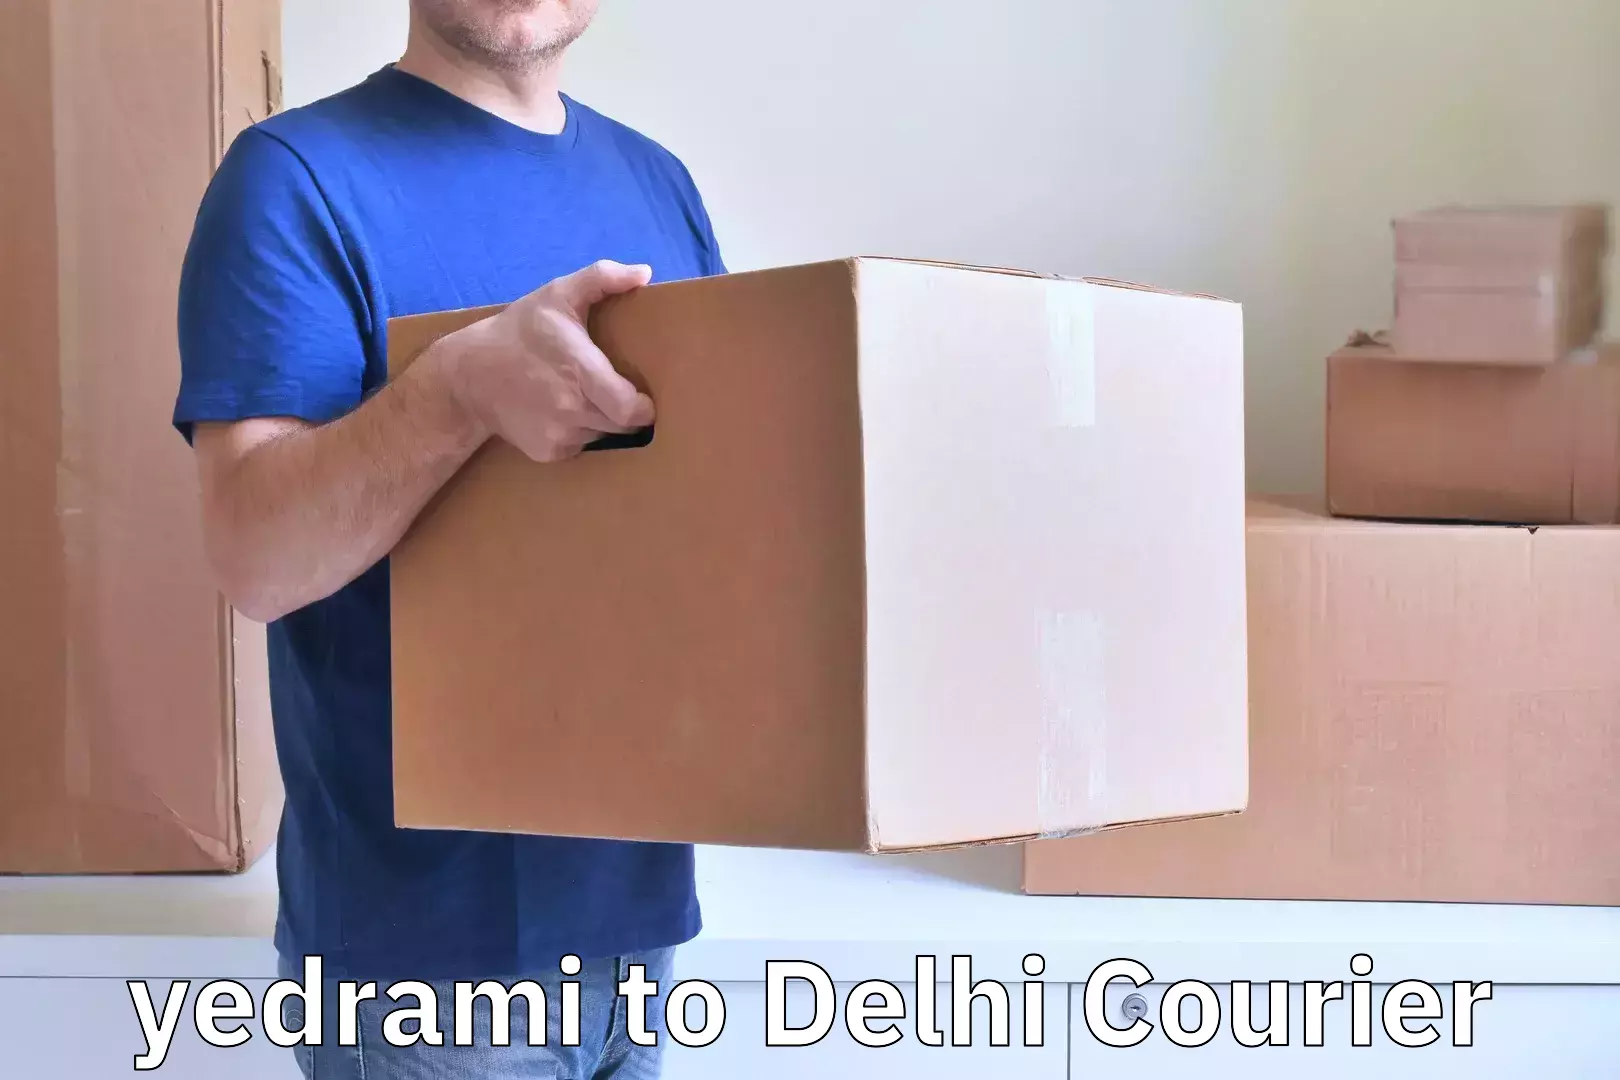 Personal luggage delivery yedrami to NCR